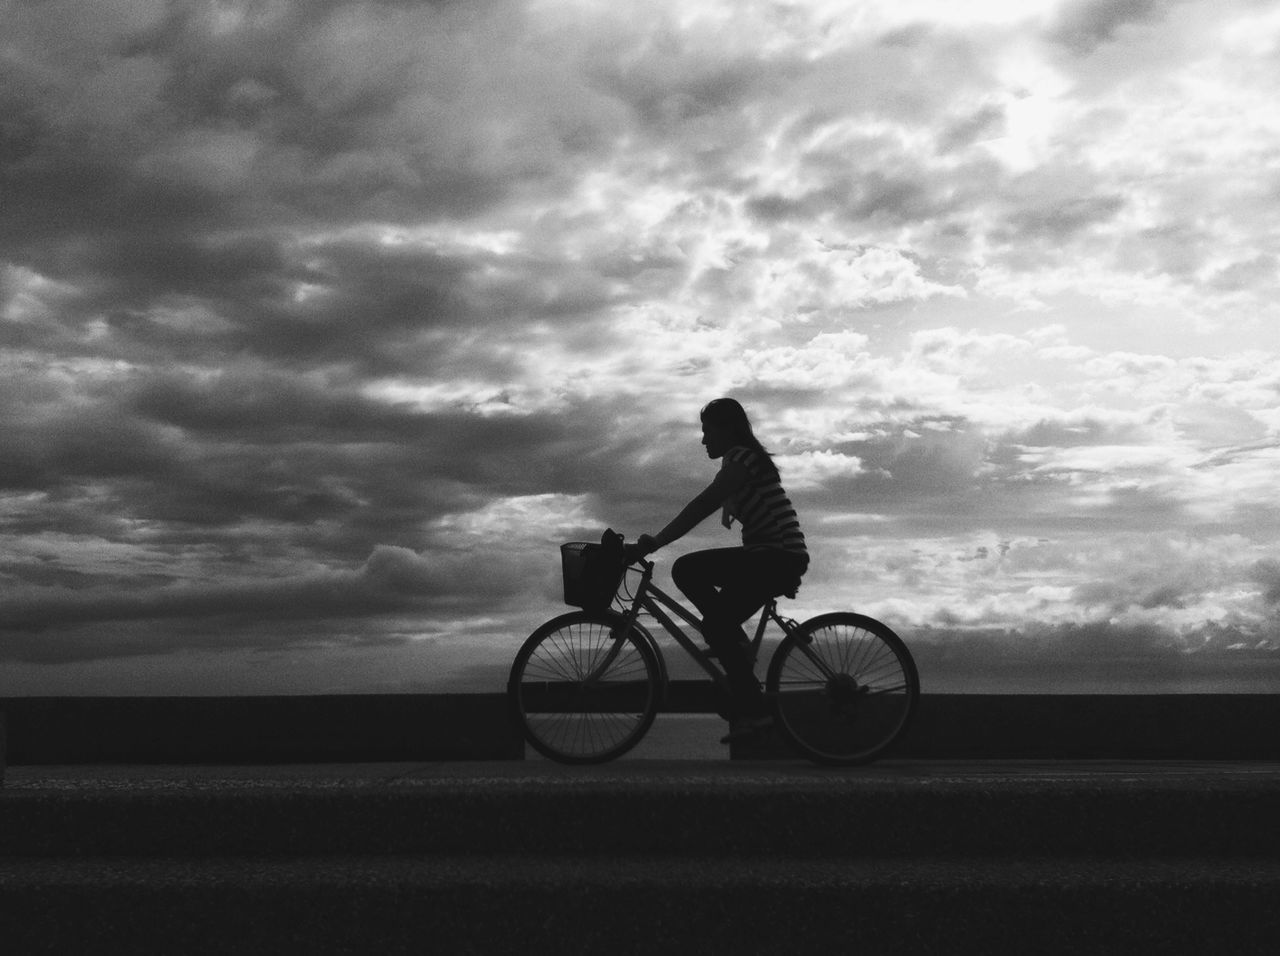 transportation, bicycle, land vehicle, mode of transport, sky, cloud - sky, riding, cycling, stationary, cloudy, men, cloud, road, parked, lifestyles, parking, side view, leisure activity